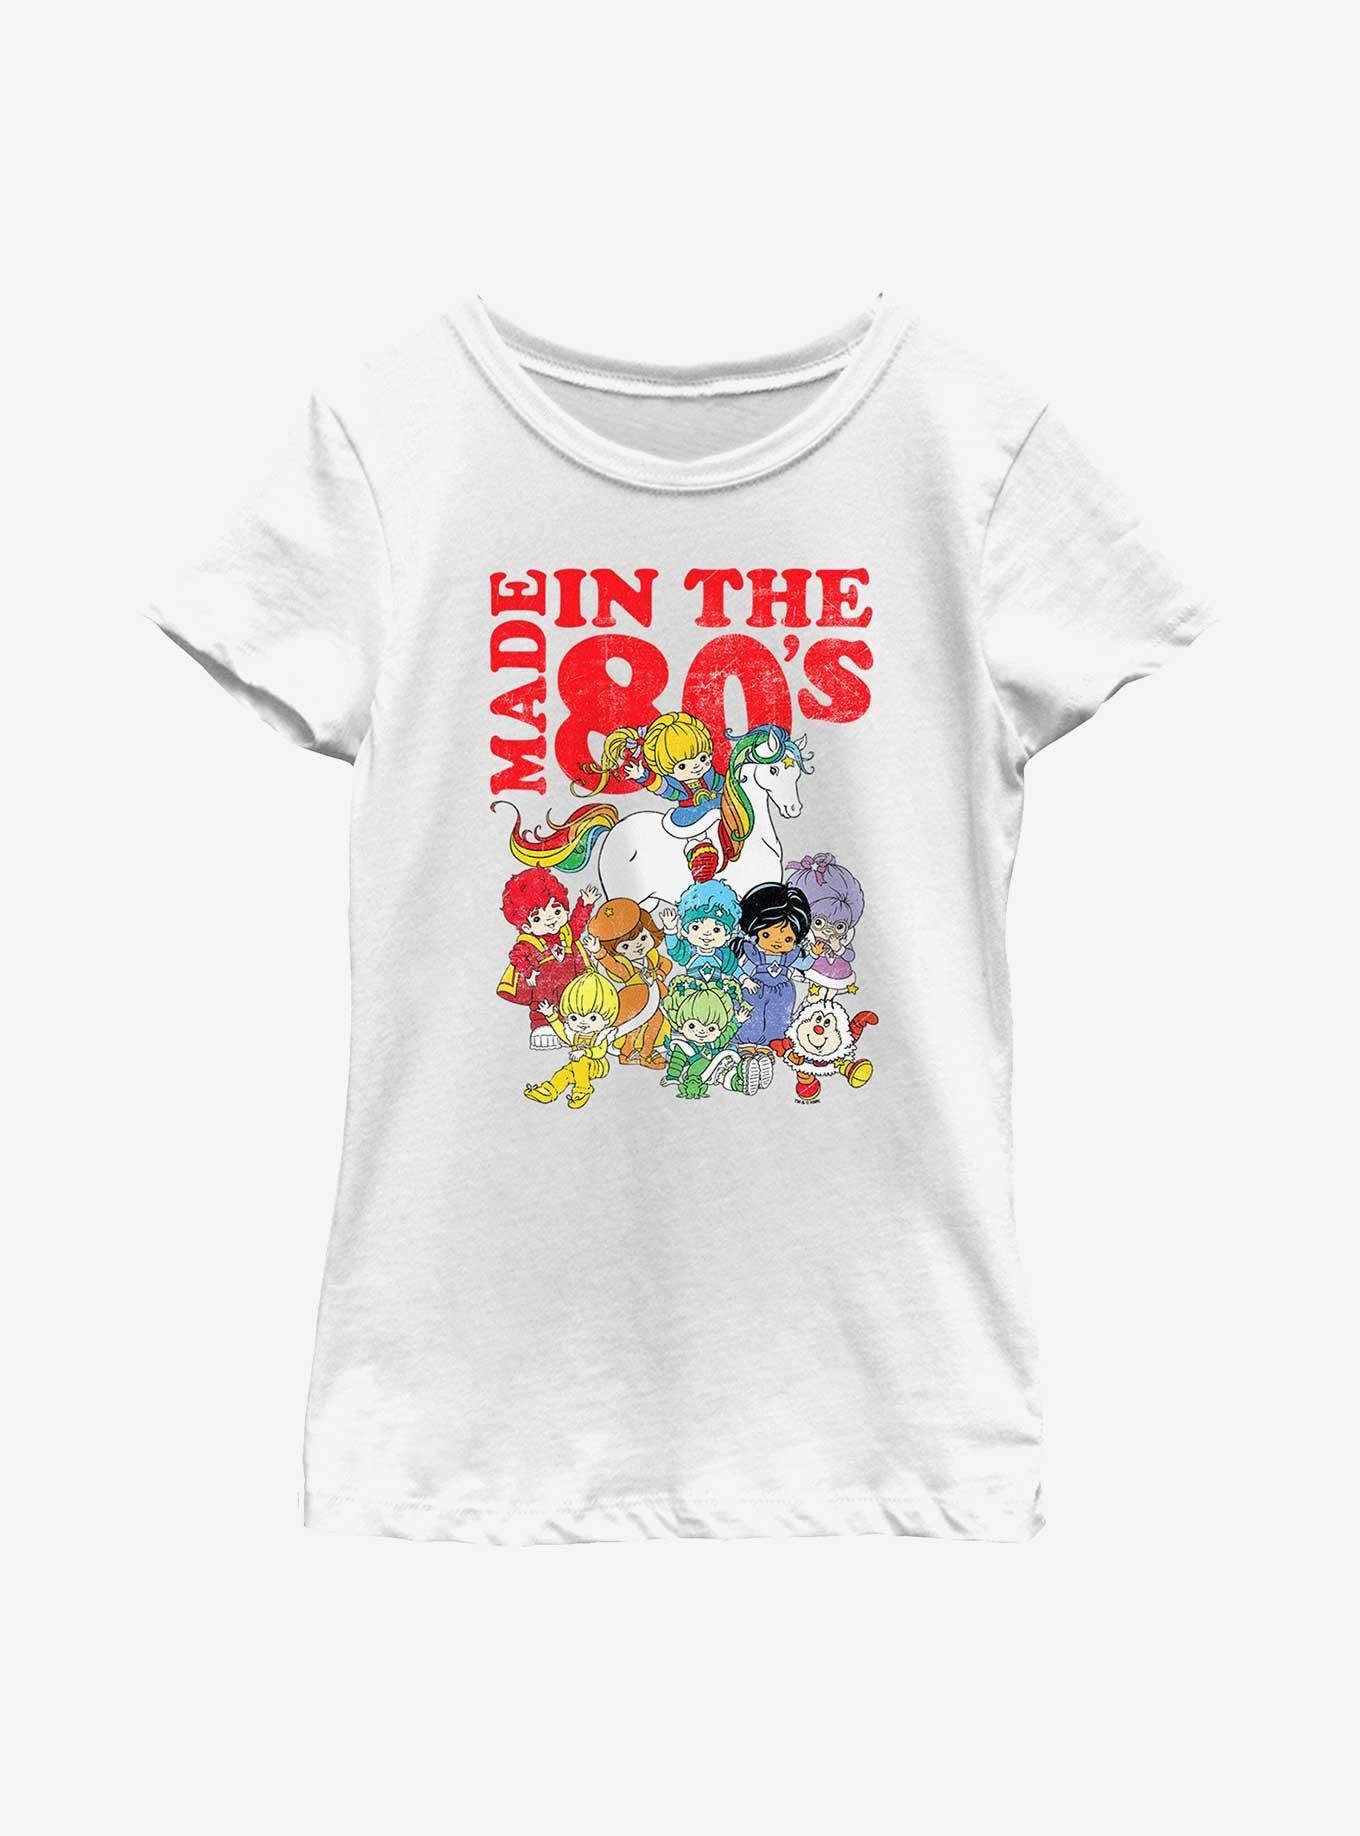 Rainbow Brite Made In The 80's Youth Girls T-Shirt, WHITE, hi-res